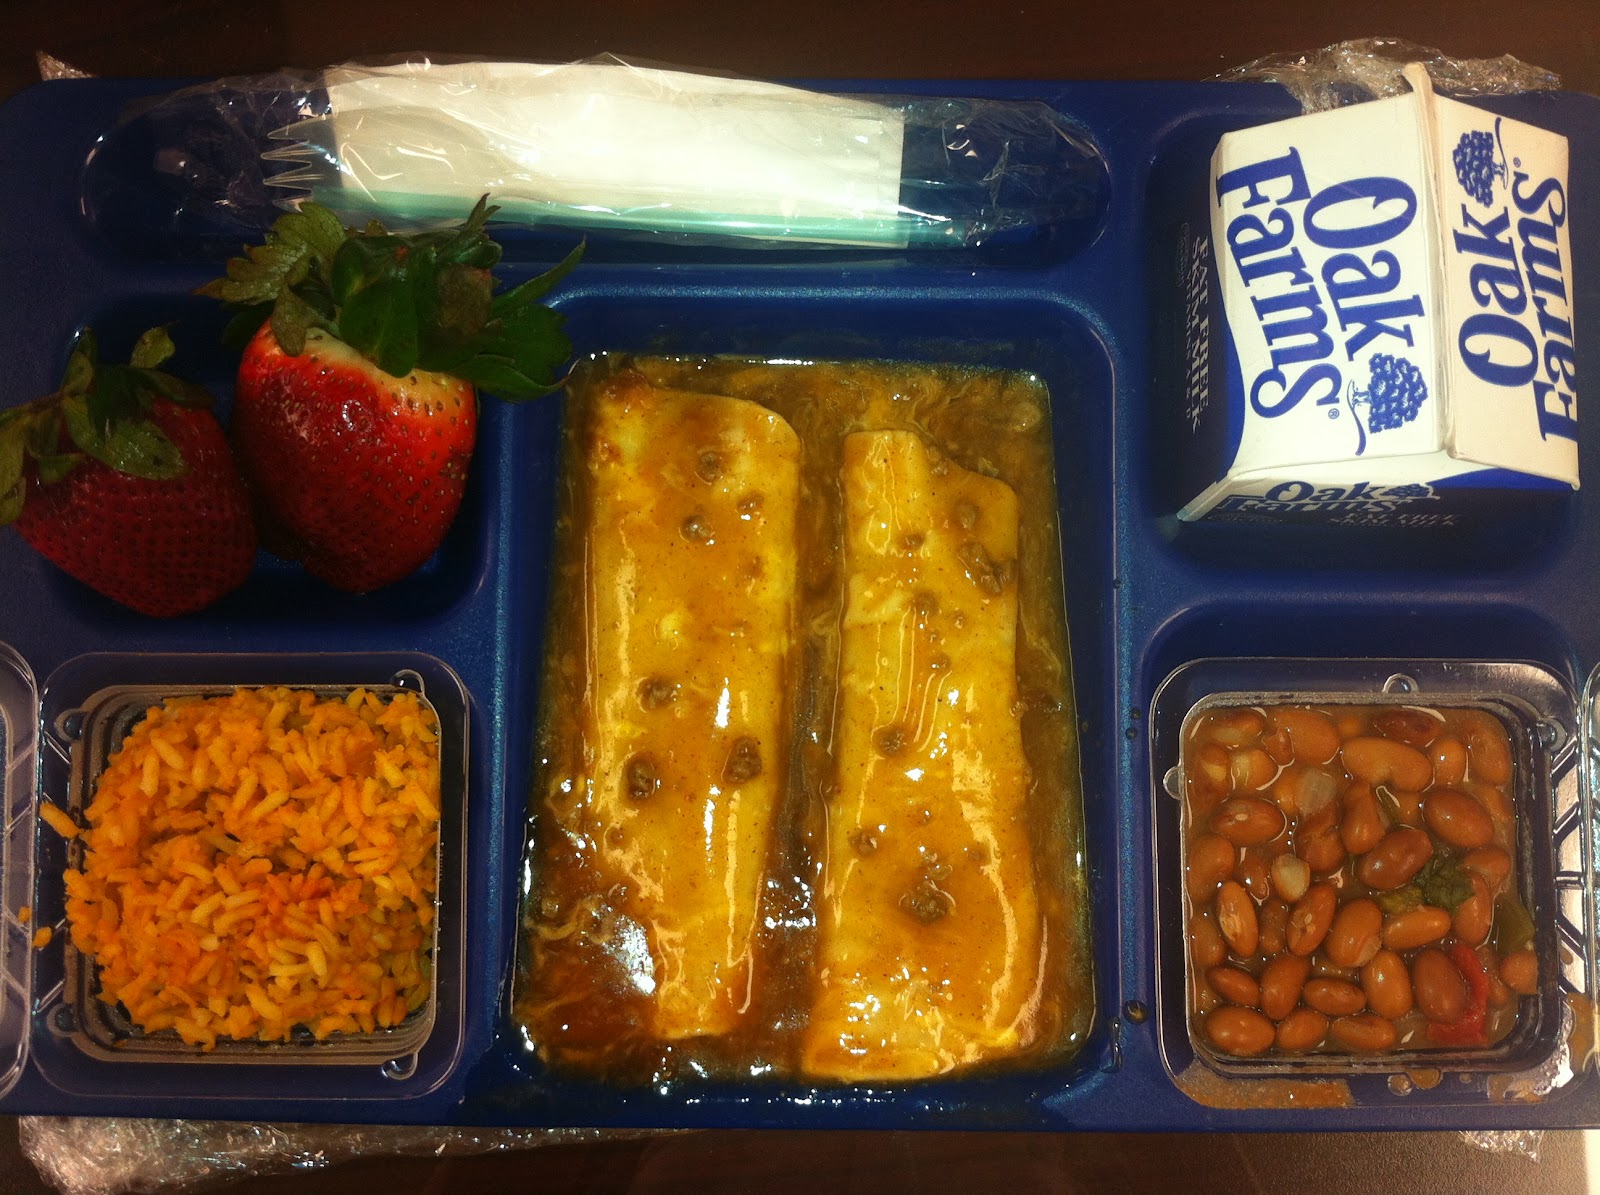 Country: USA. Contents: Beef and Cheese Enchiladas, Spanish Rice, beans a la charra, strawberries, skim milk!